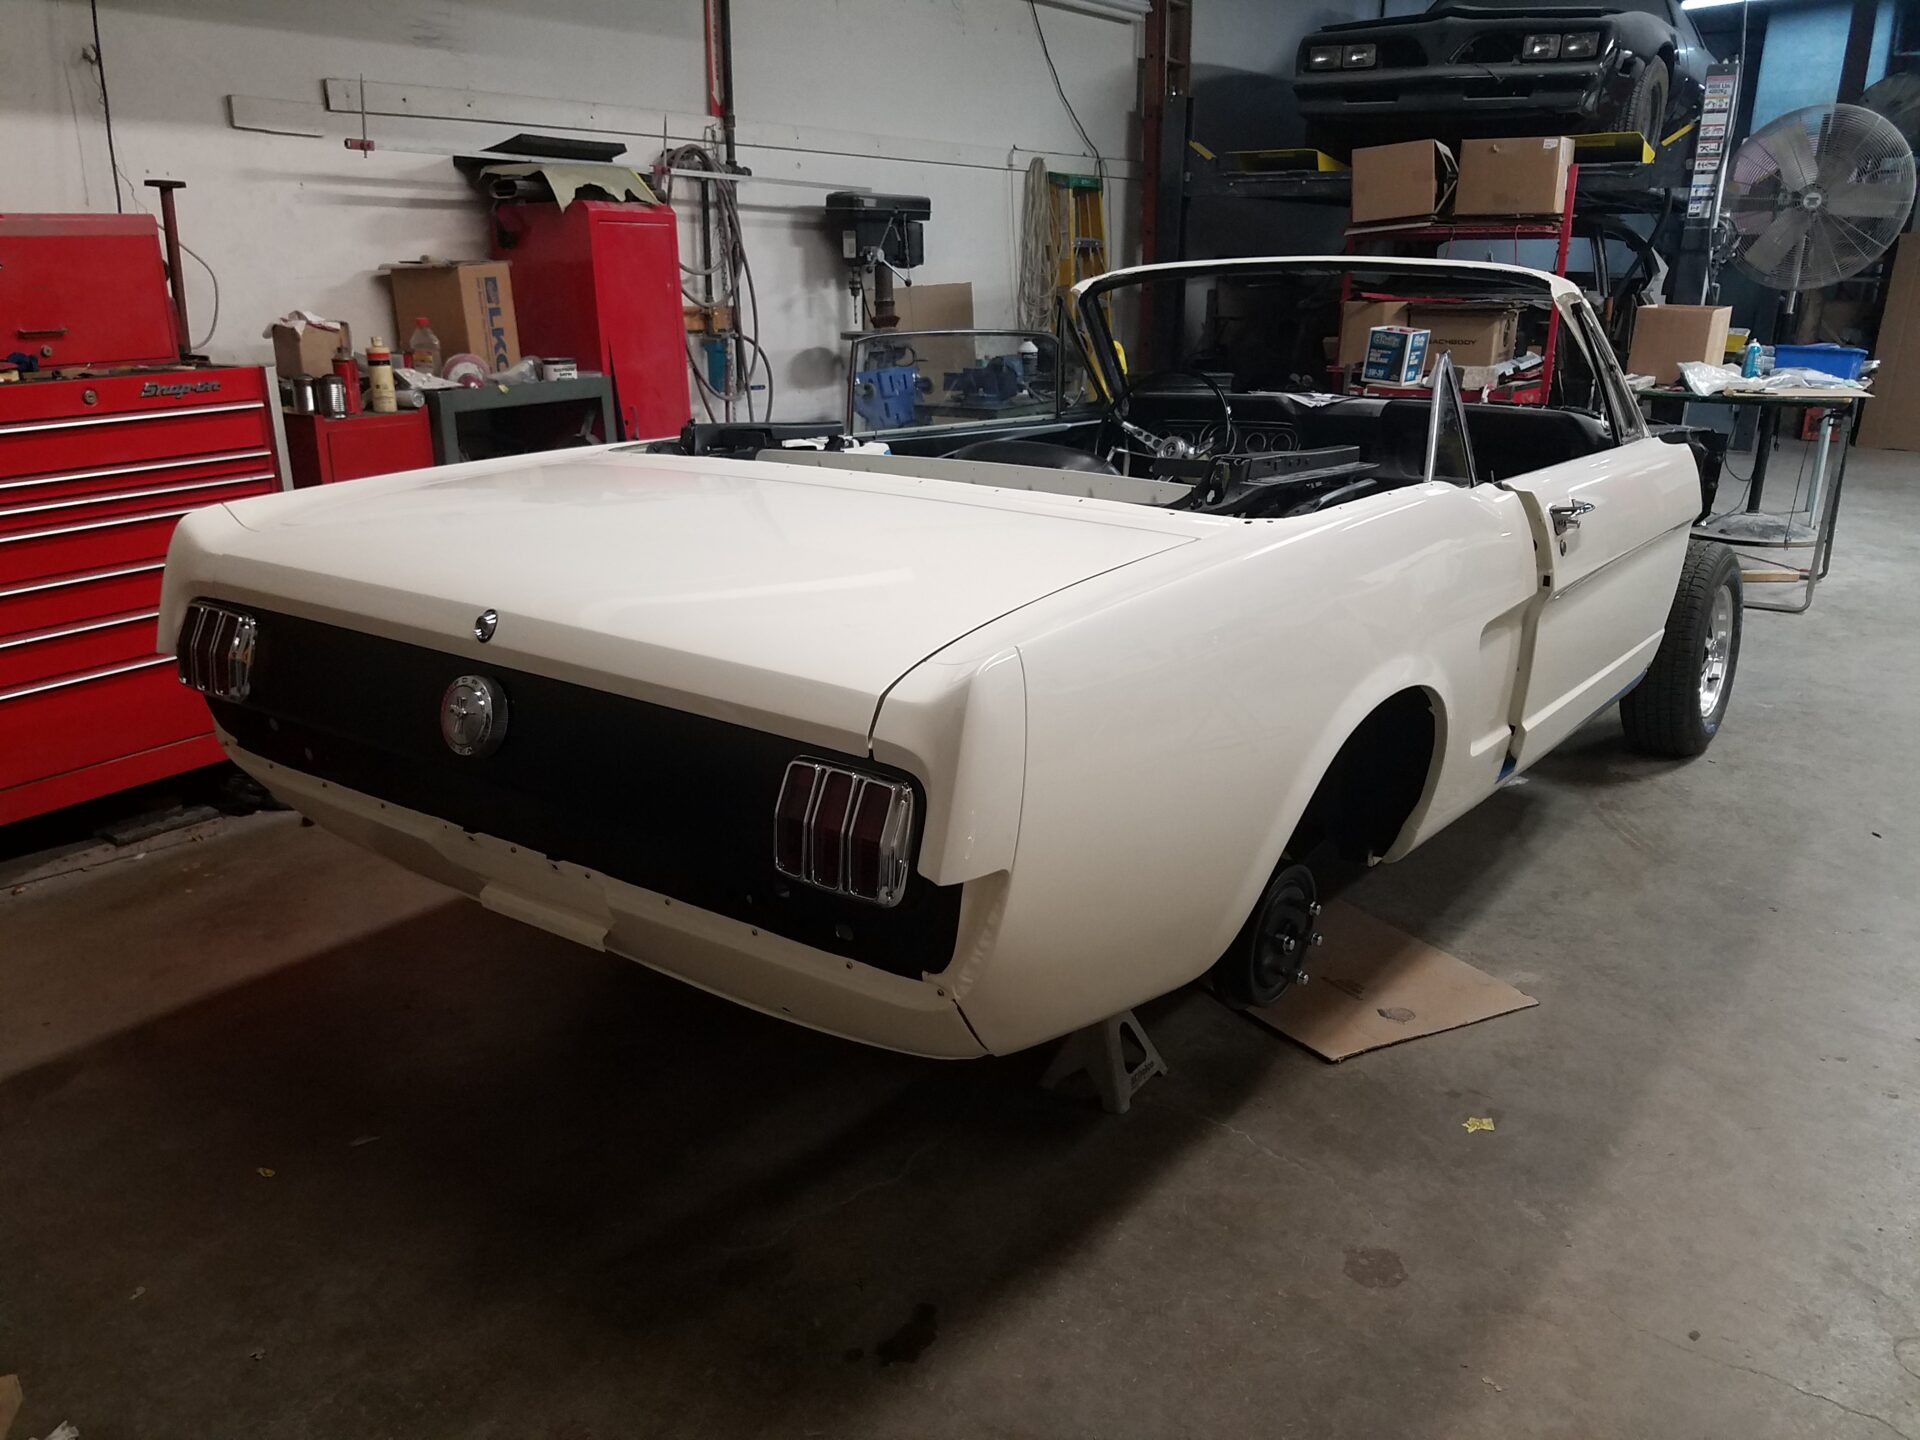 A restored rear side of the 1966 Ford Mustang Convertible